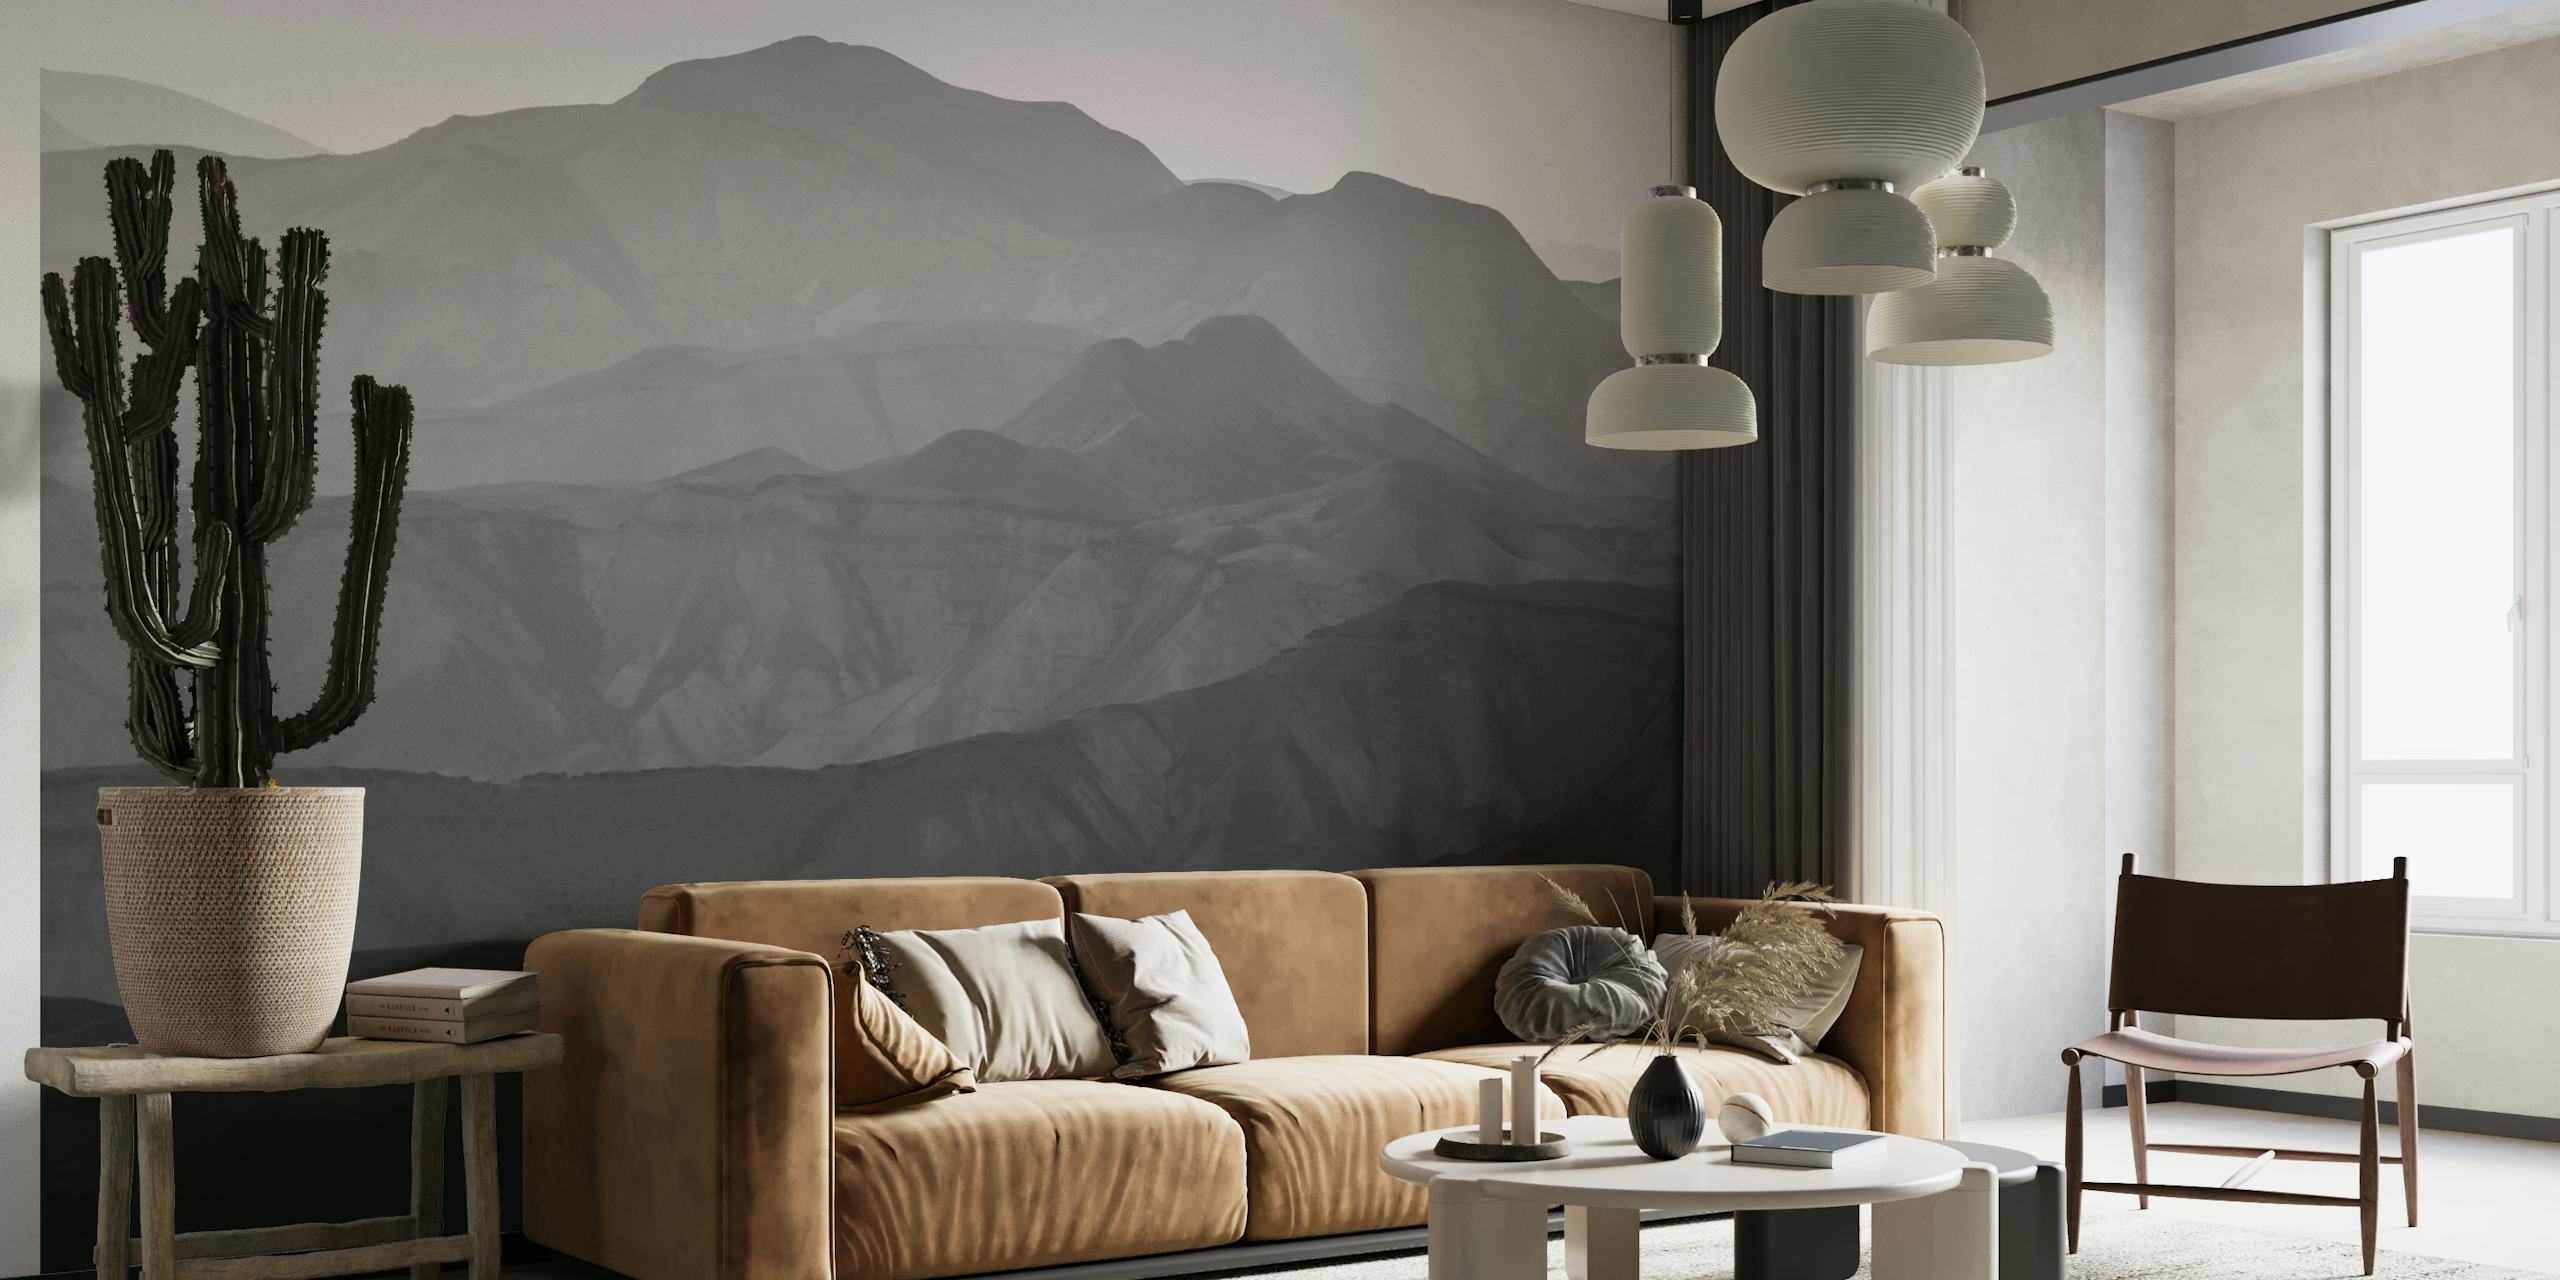 Monochrome wall mural of the Judean Desert mountains adding tranquility to interior decor